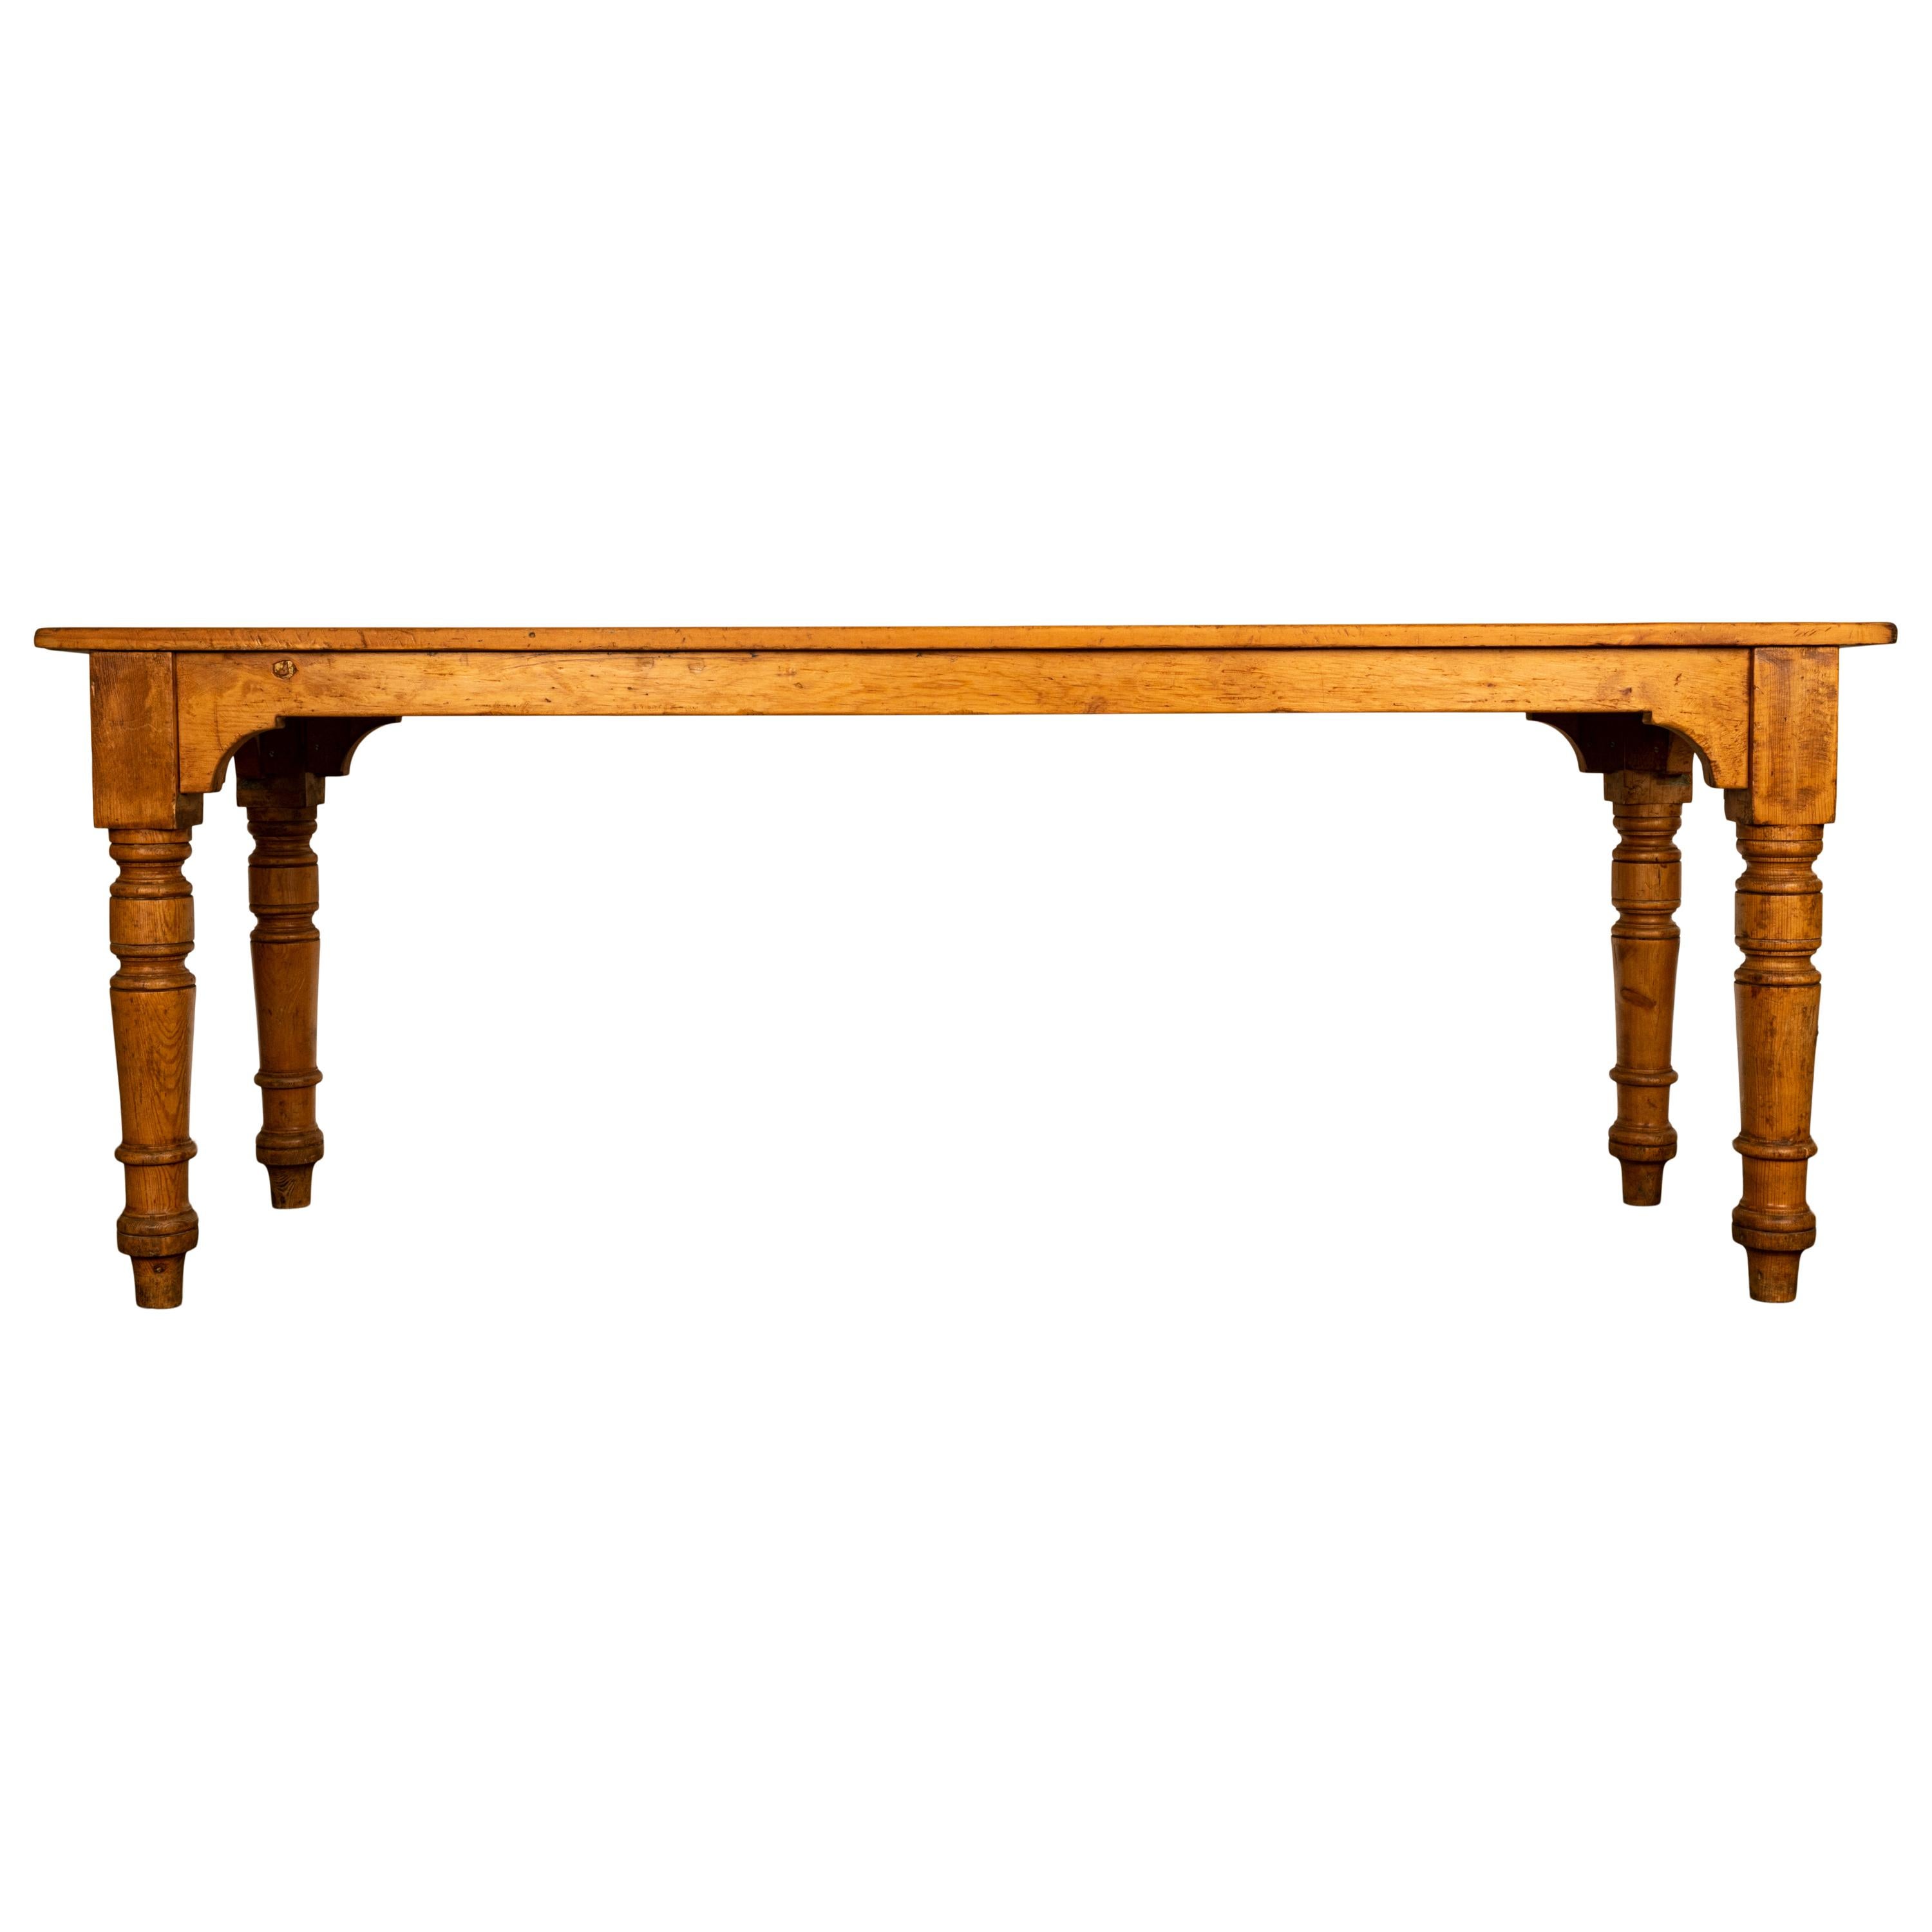 A good antique 19th century pine 7' country farmhouse pine table, circa 1860.
The long table is made of pine and is raised on four turned legs, the table skirt is arched on each side, the table top is made up of three long planks, the table has a